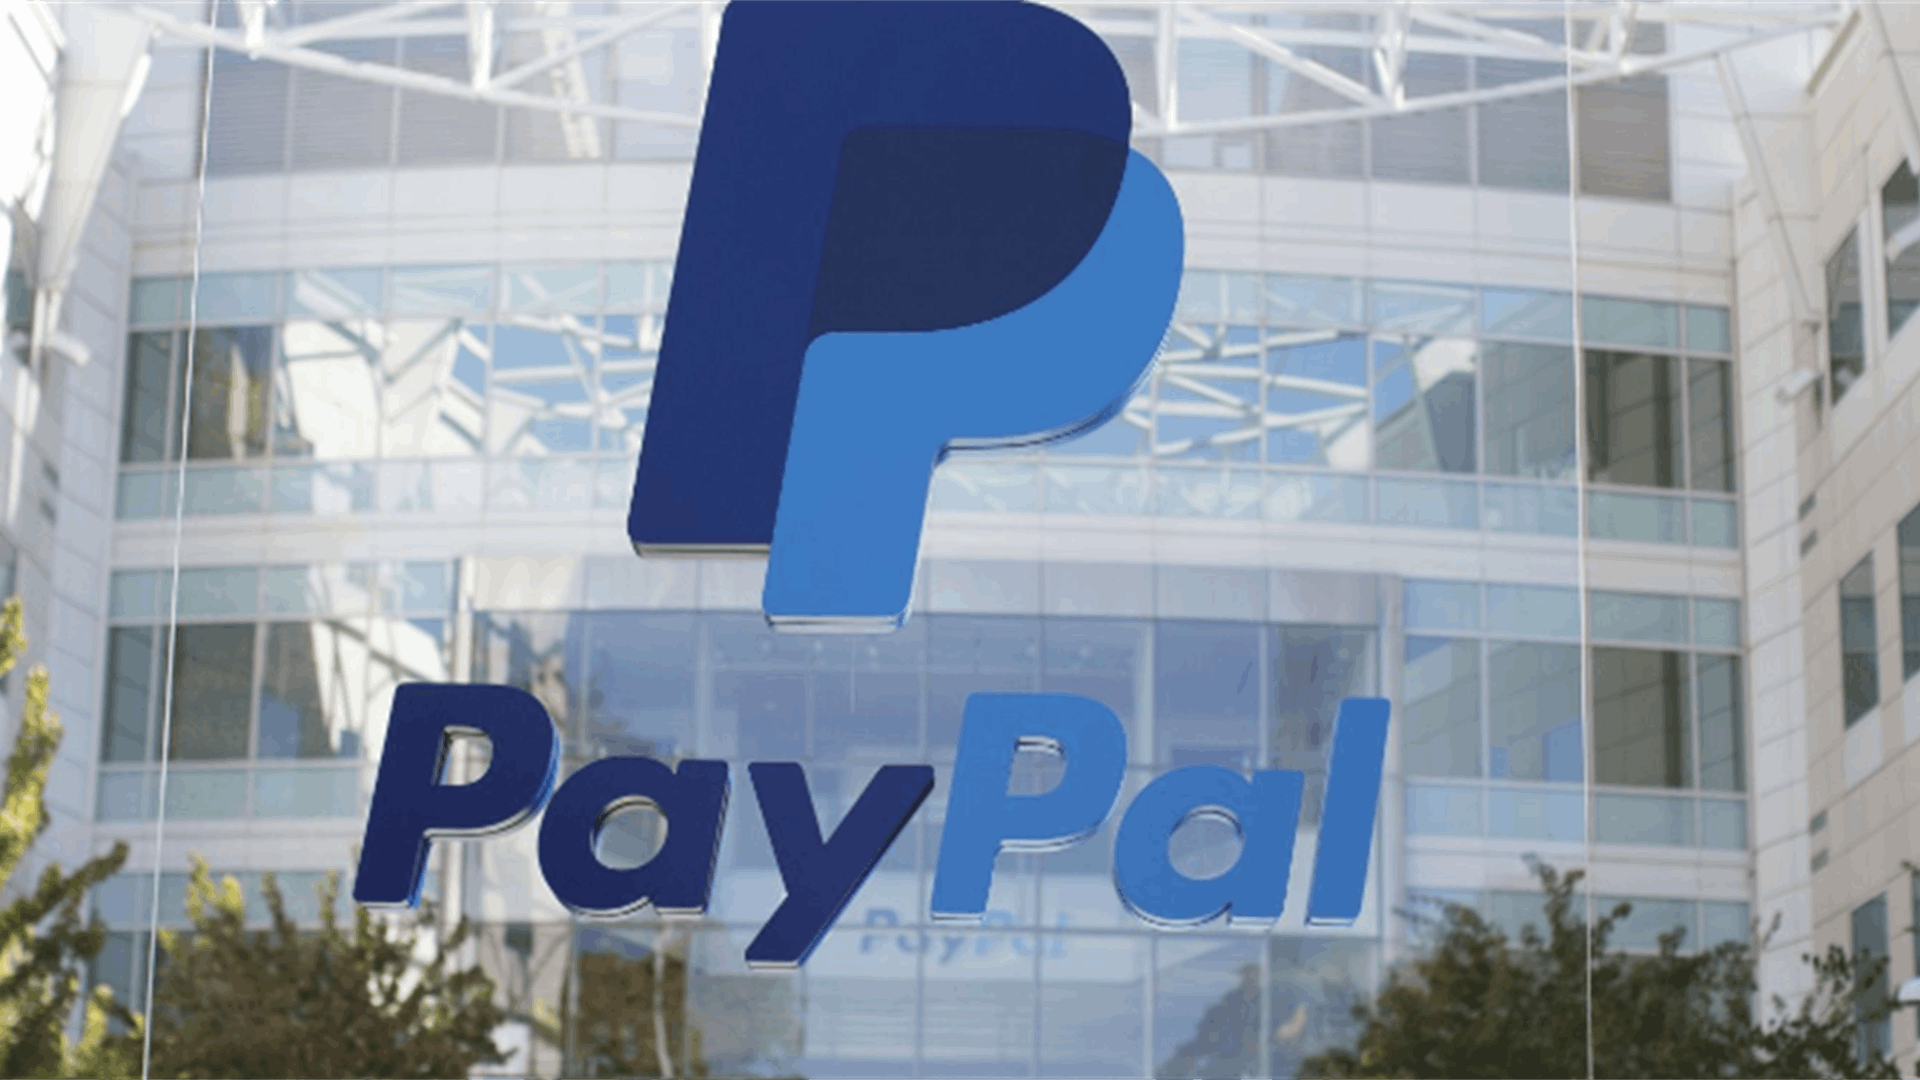 Germany is looking into PayPal’s terms for merchants